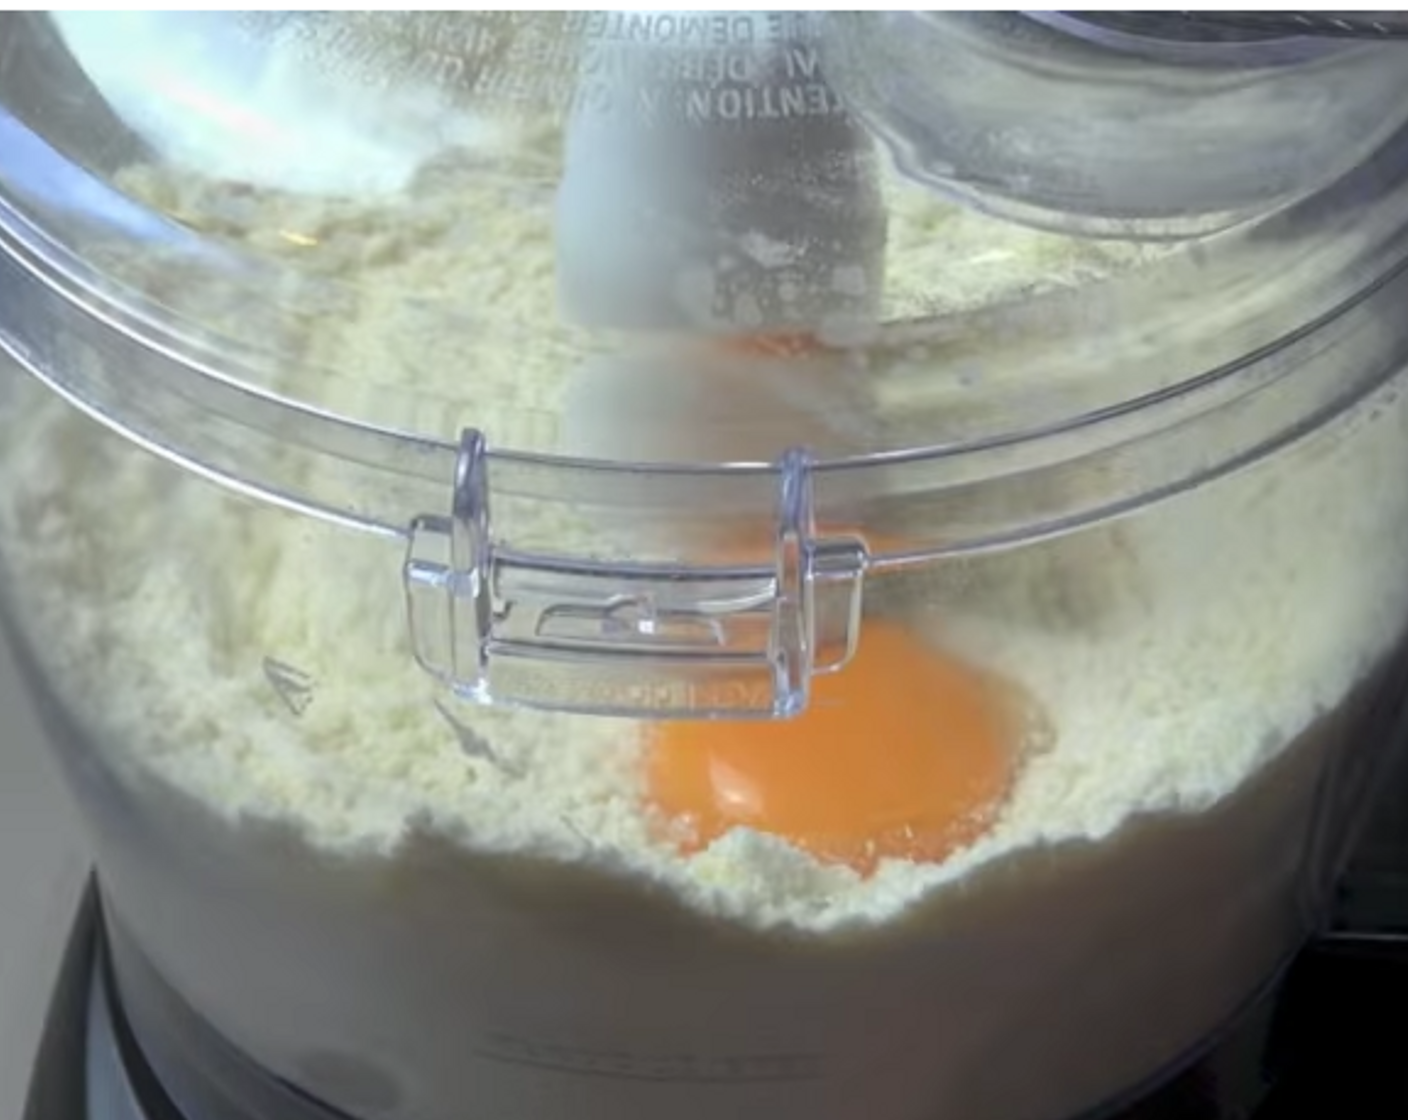 step 1 Into a food processor, pulse together the All-Purpose Flour (1/2 cup), Caster Sugar (2 Tbsp), and Butter (1/2 cup). Then add in your Egg (1) and Water (1 Tbsp).  Combine everything well.